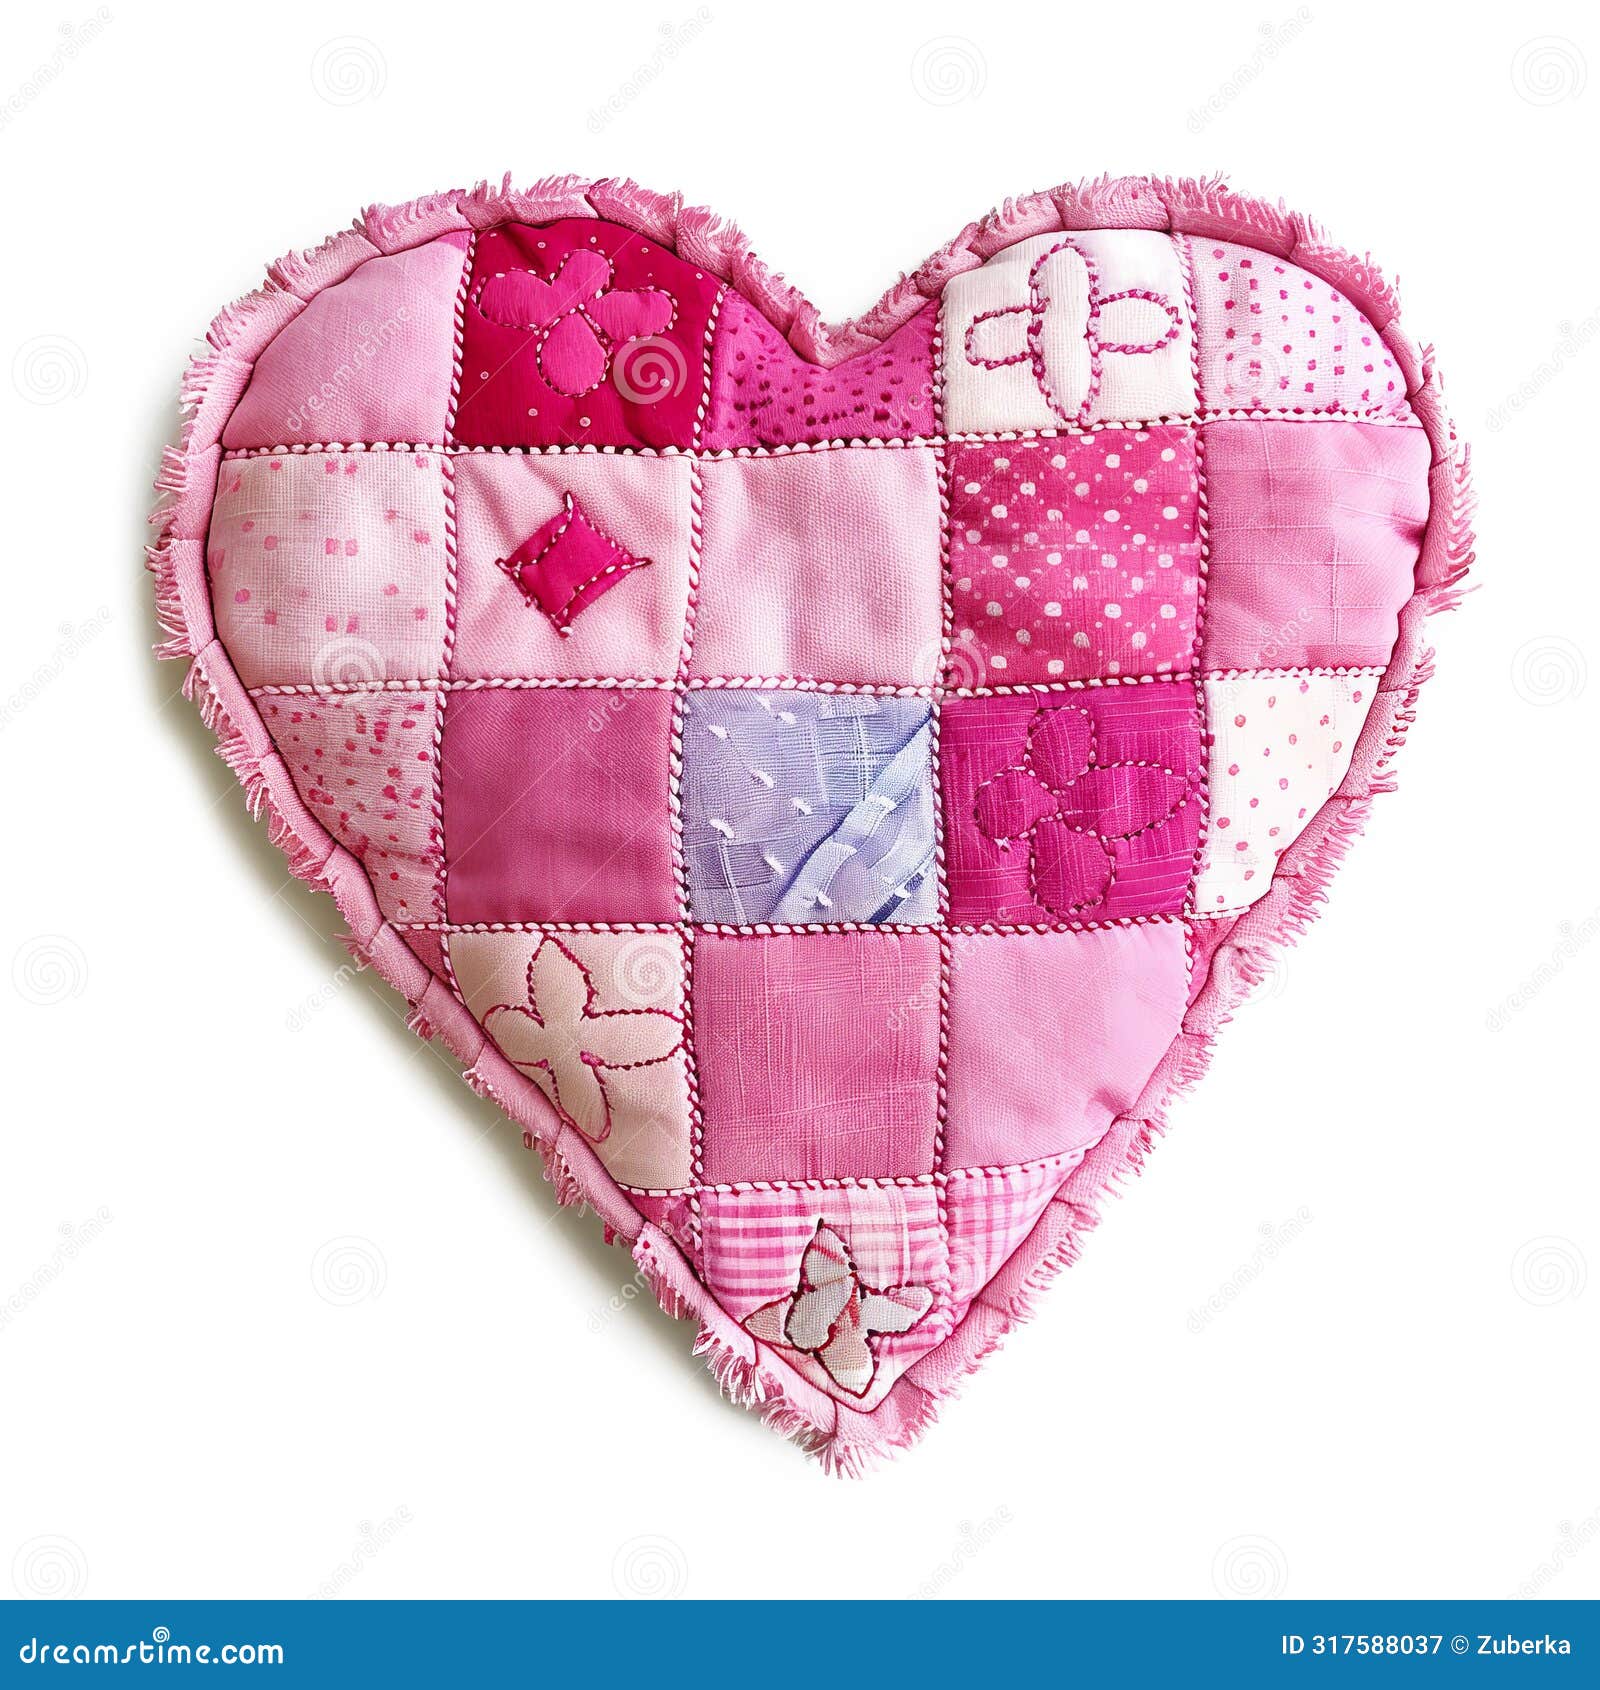 pink heart made of fabric patches 